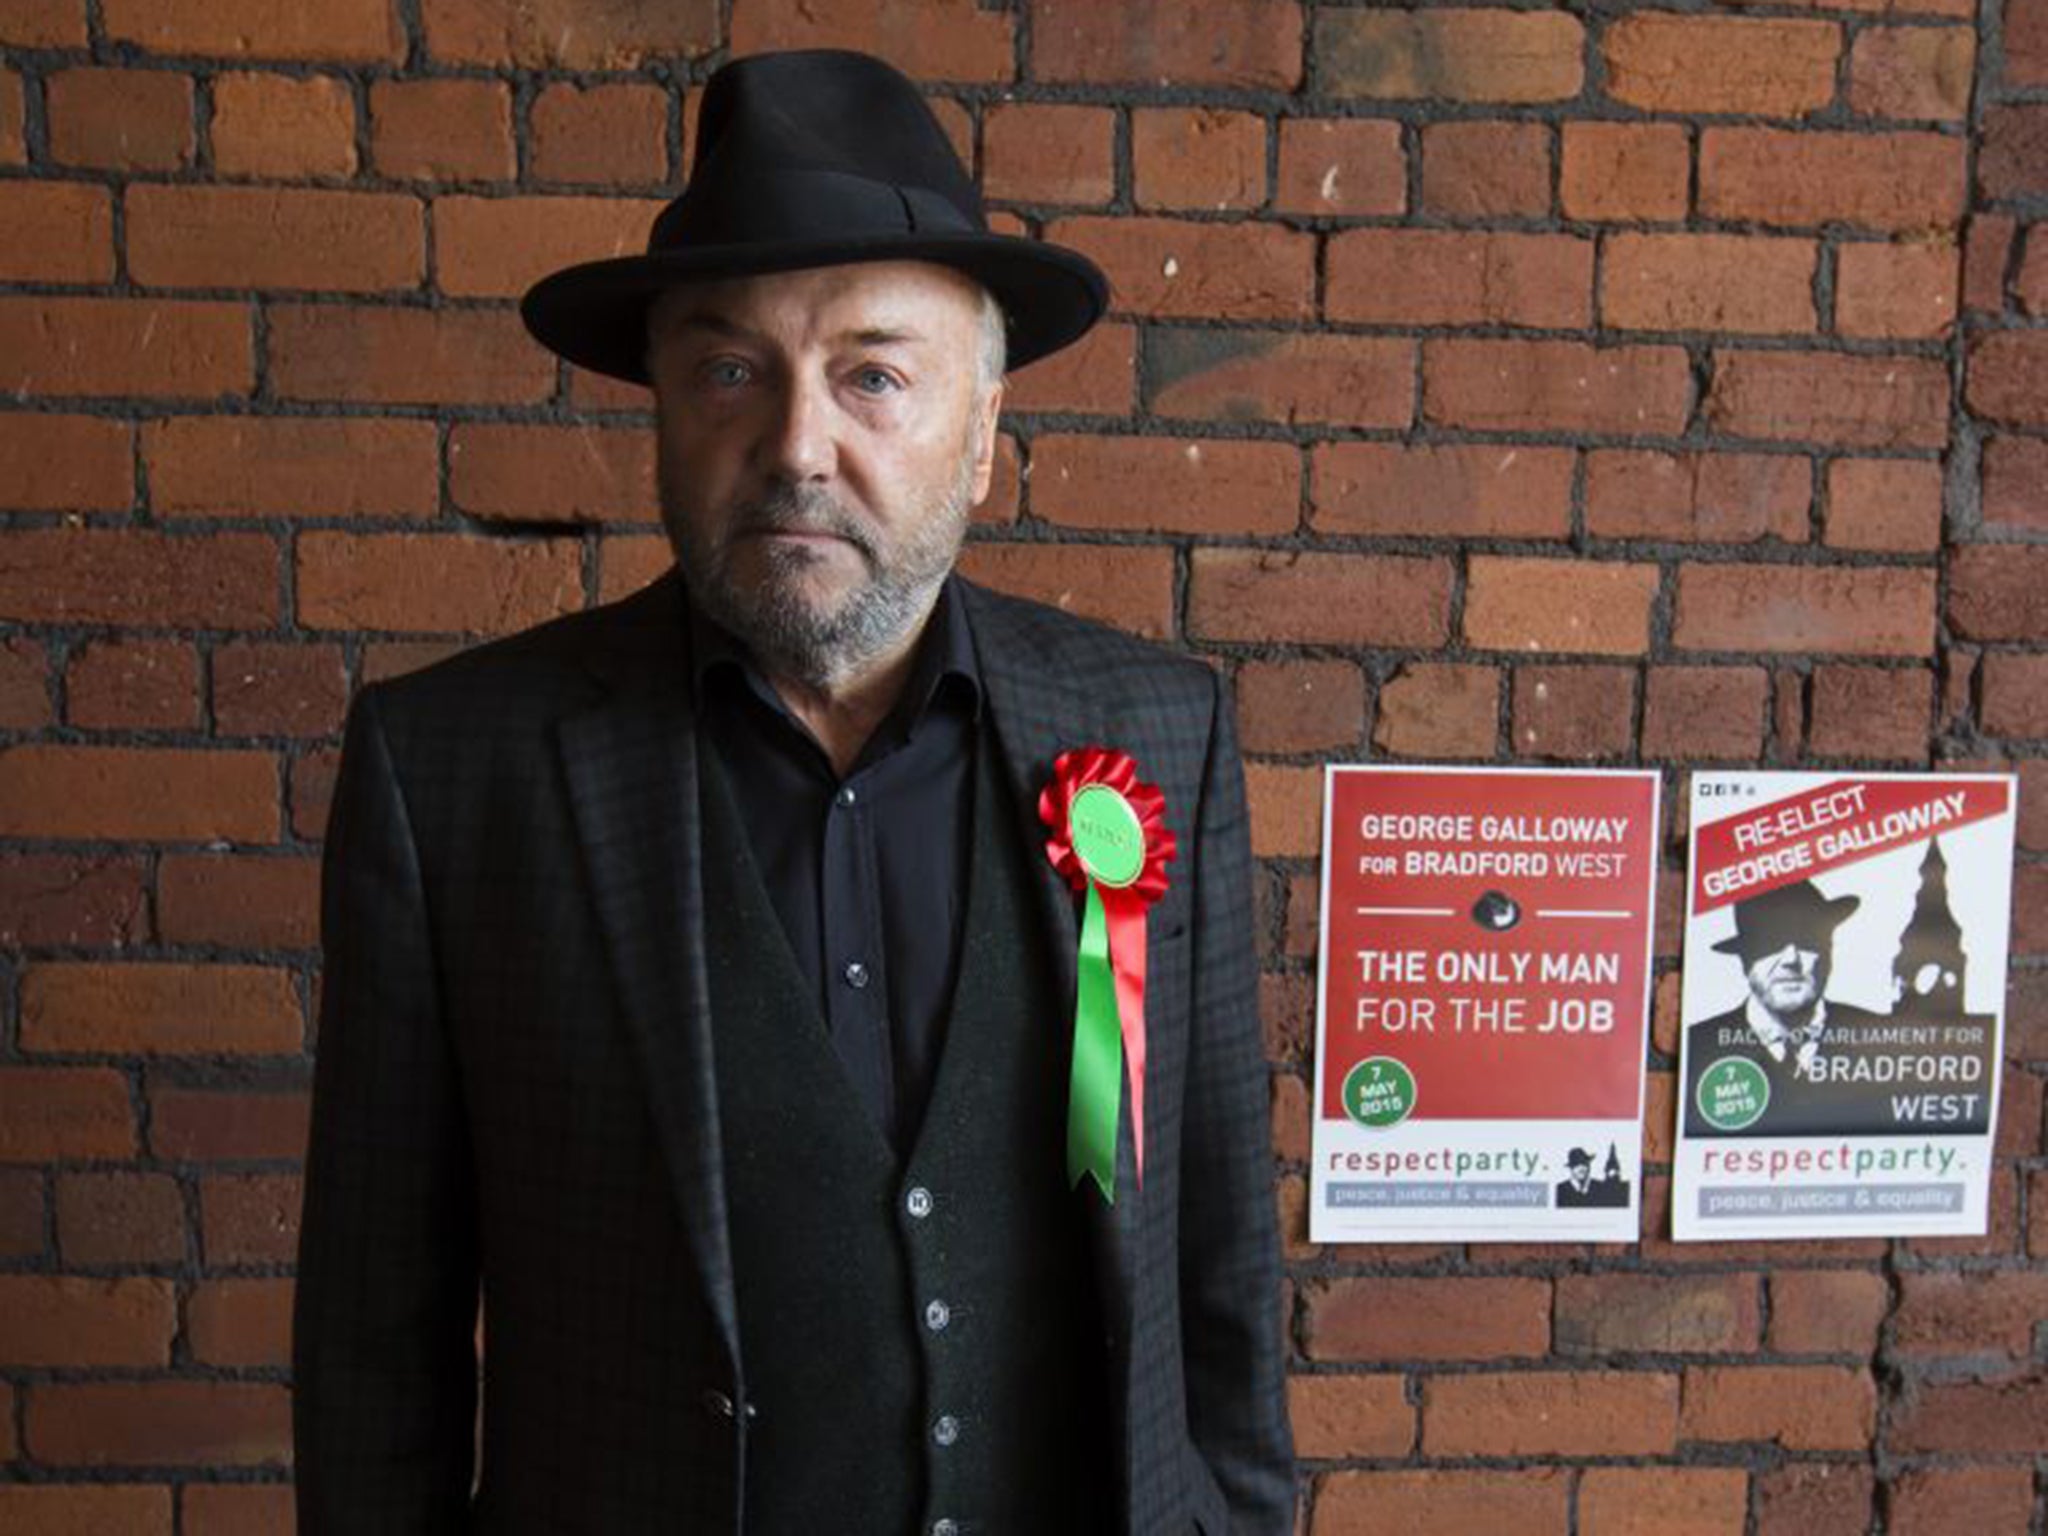 George Galloway lost his seat at the general election